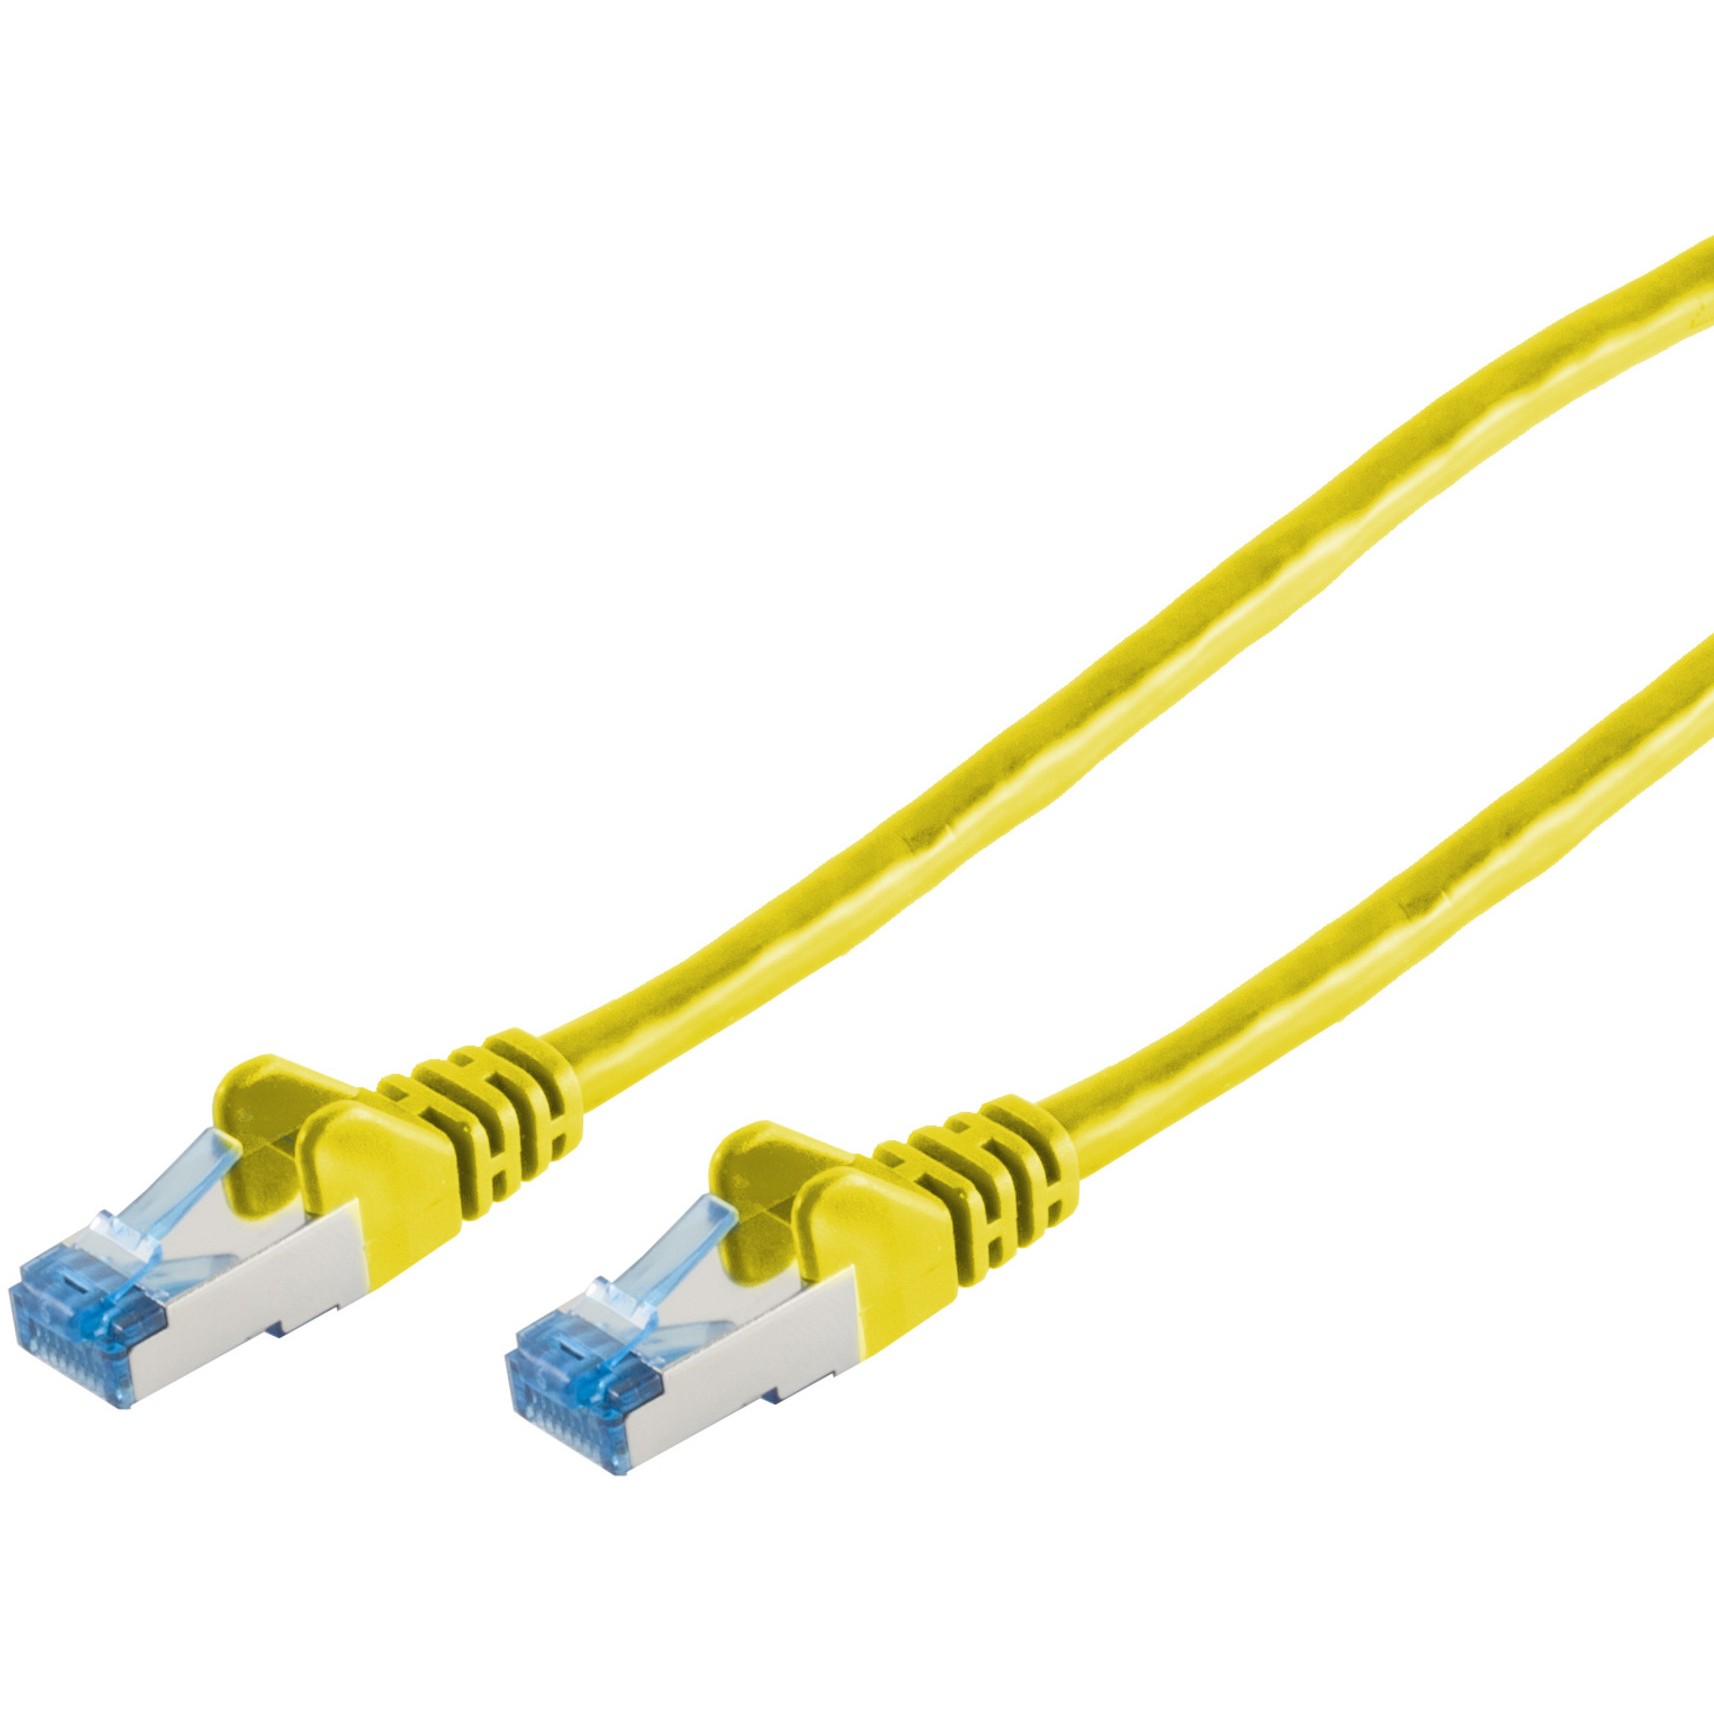 S-Conn 75711-Y networking cable - 75711-Y